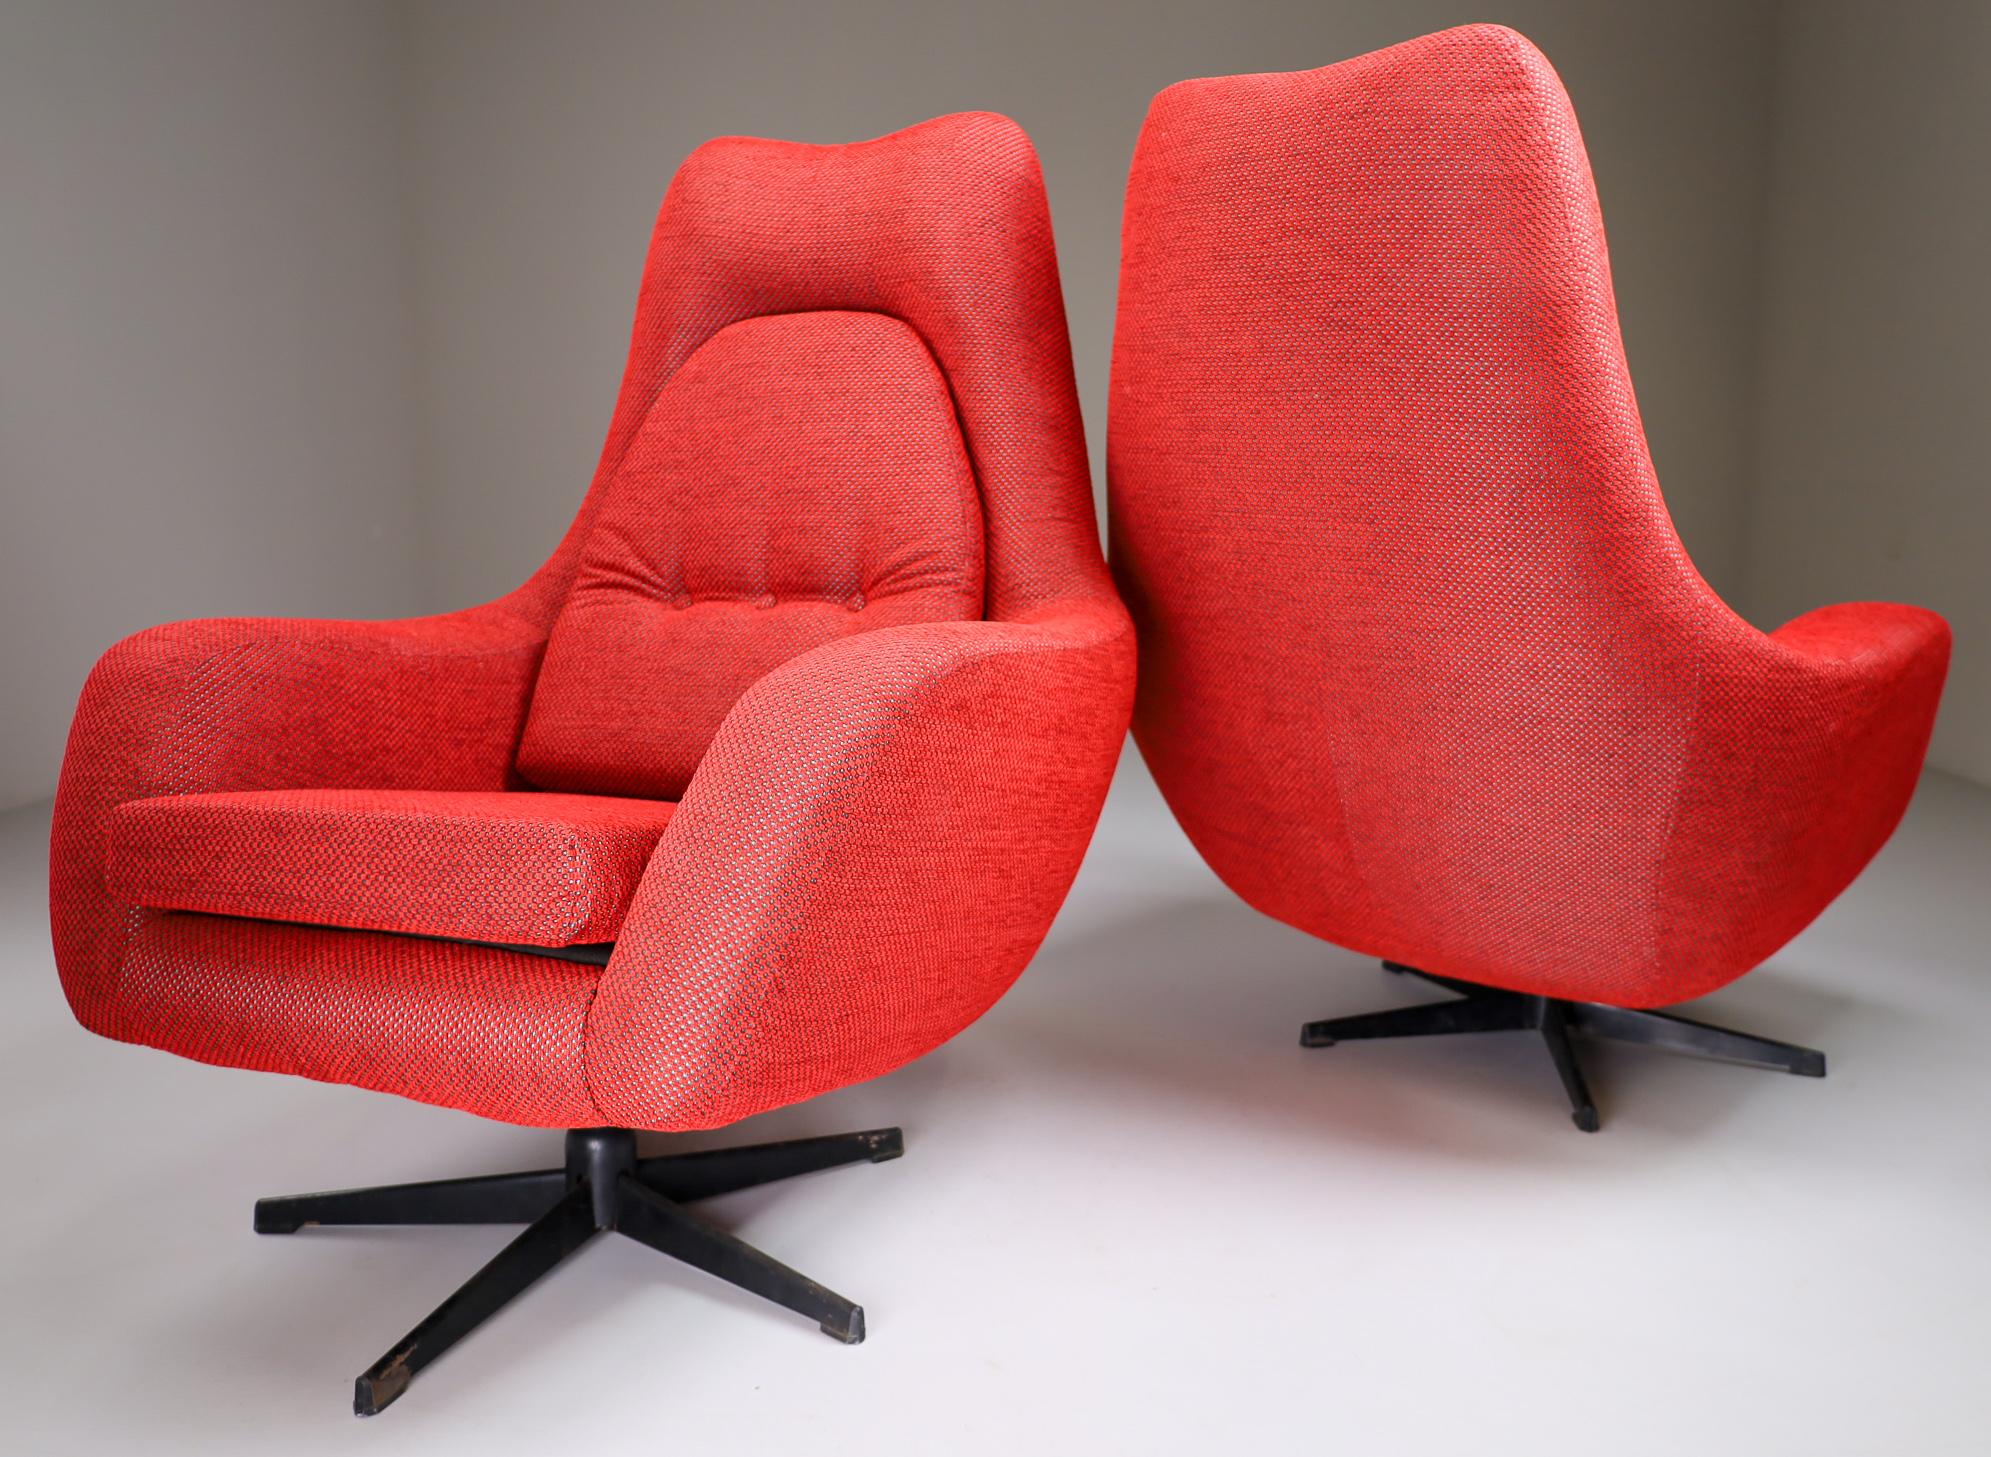 Pair of Swivel Chairs in New Reupholstered Red Fabric, Czech Republic 1970 In Good Condition For Sale In Almelo, NL